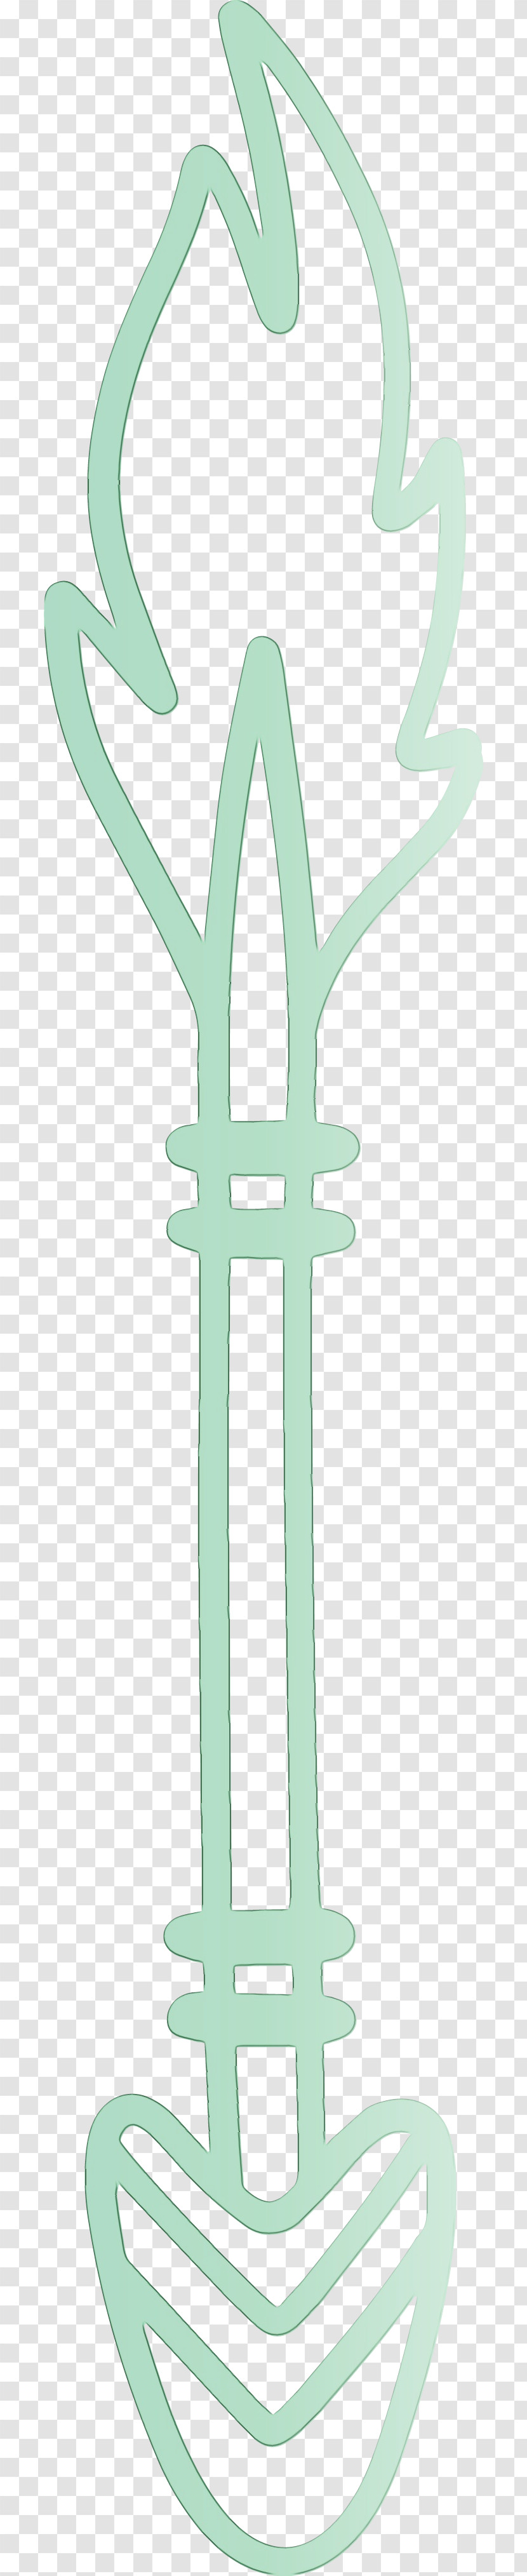 Green Turquoise Cross Symbol Transparent PNG